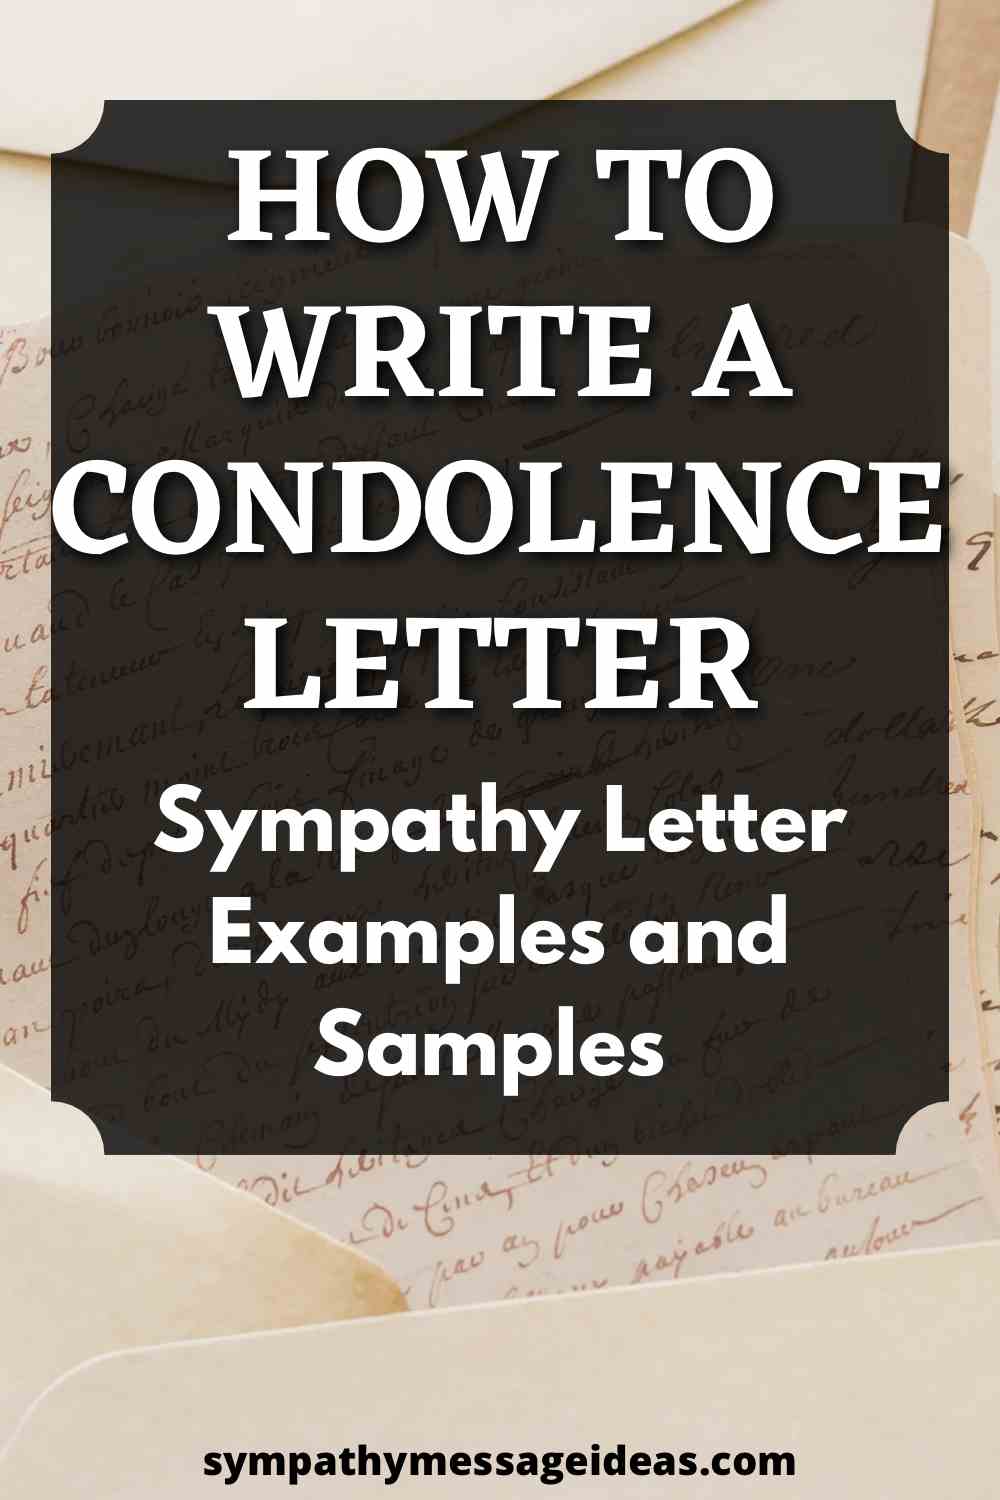 condolence letter examples and samples